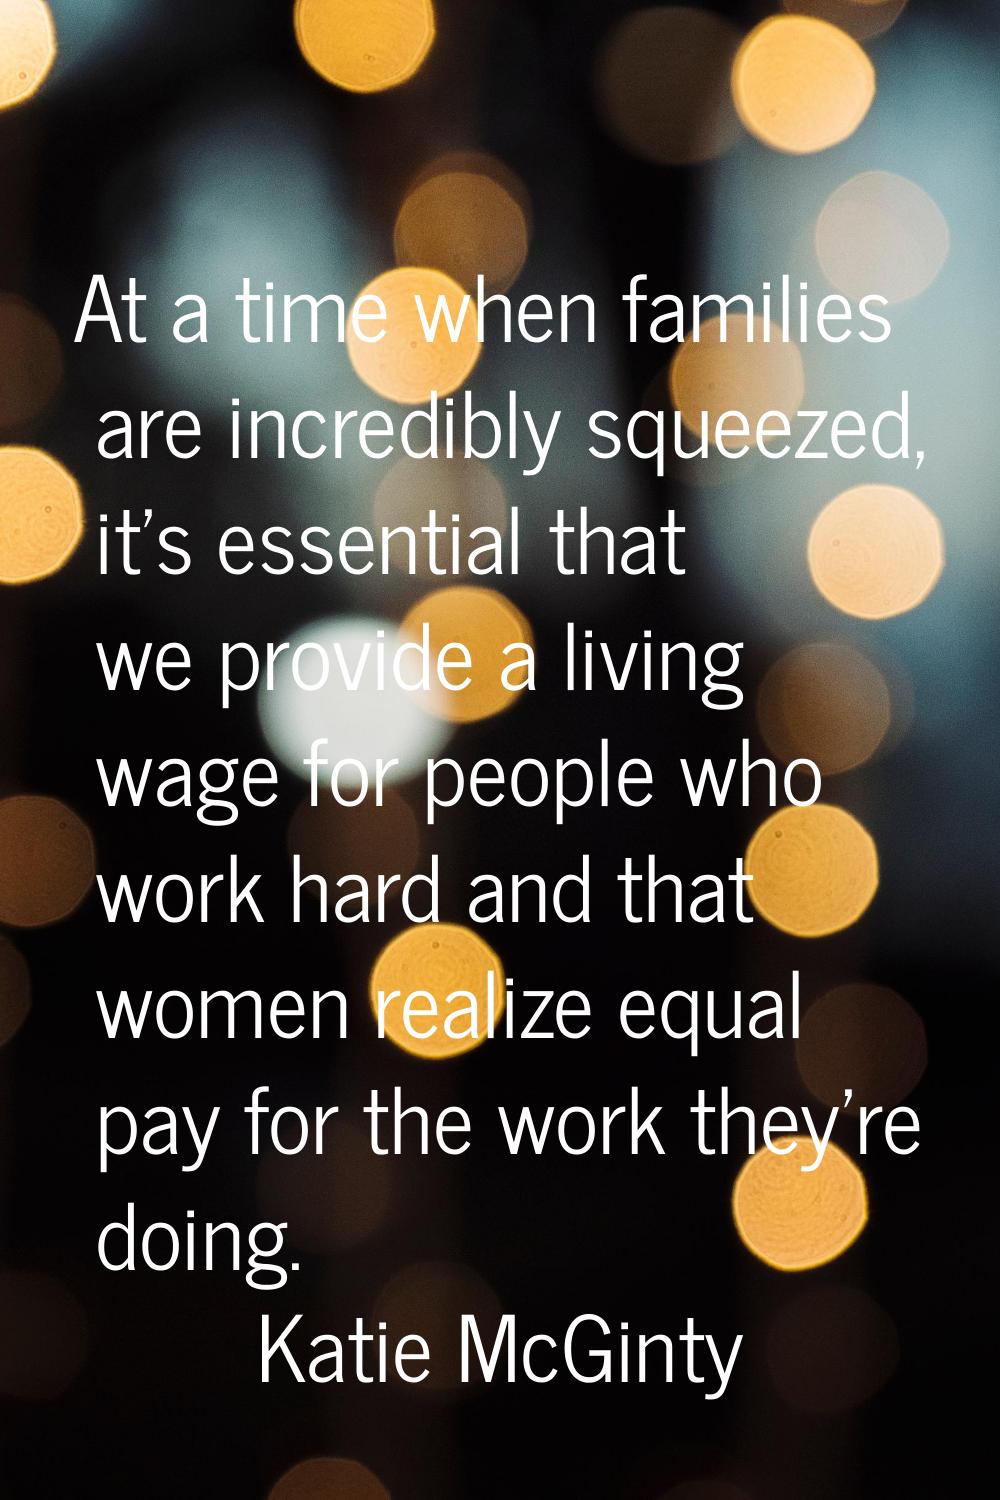 At a time when families are incredibly squeezed, it's essential that we provide a living wage for p